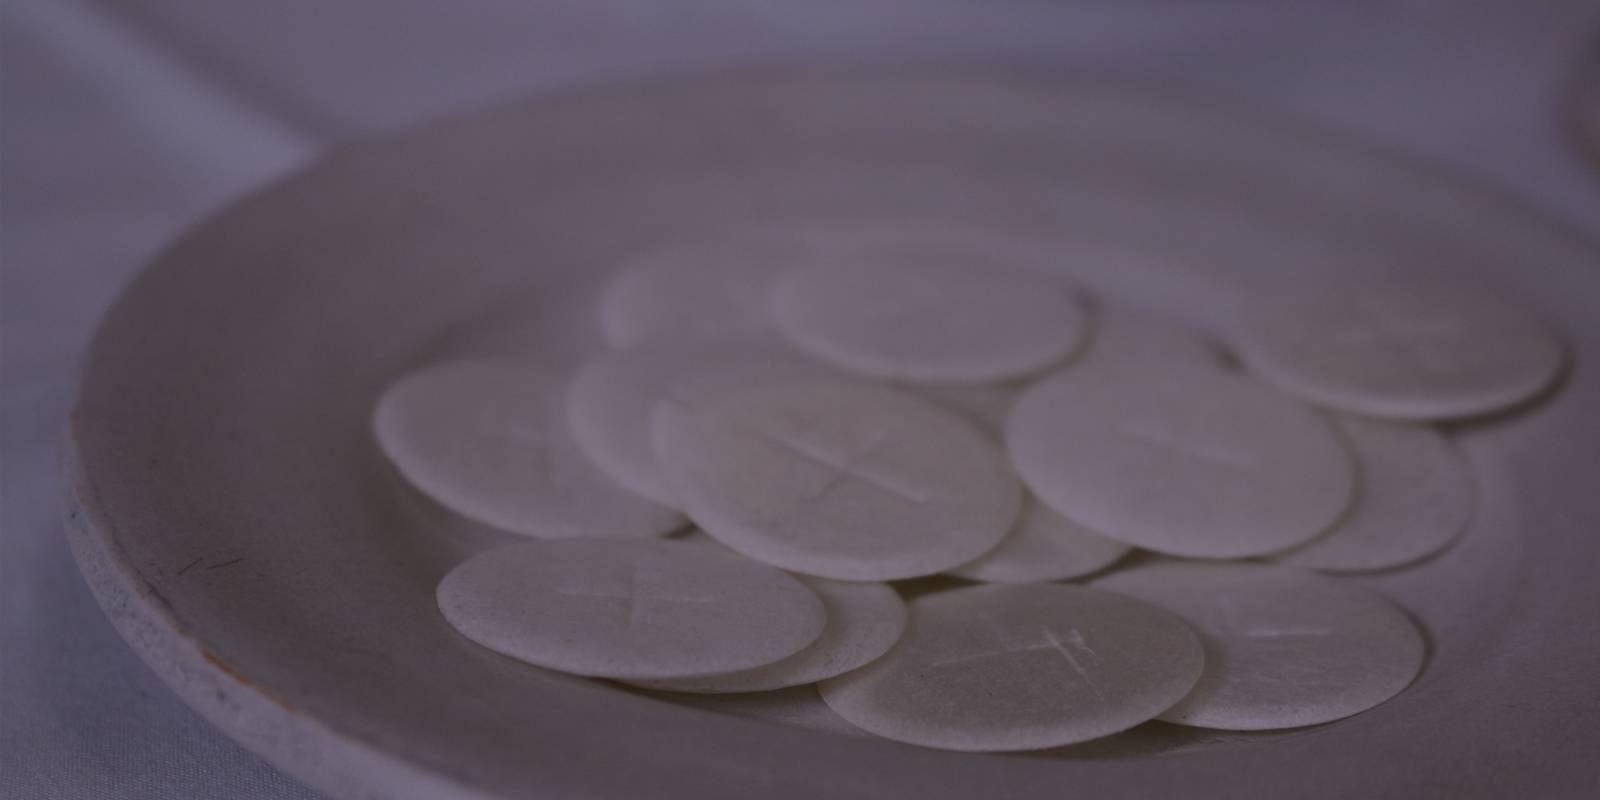 Communion wafers on a plate